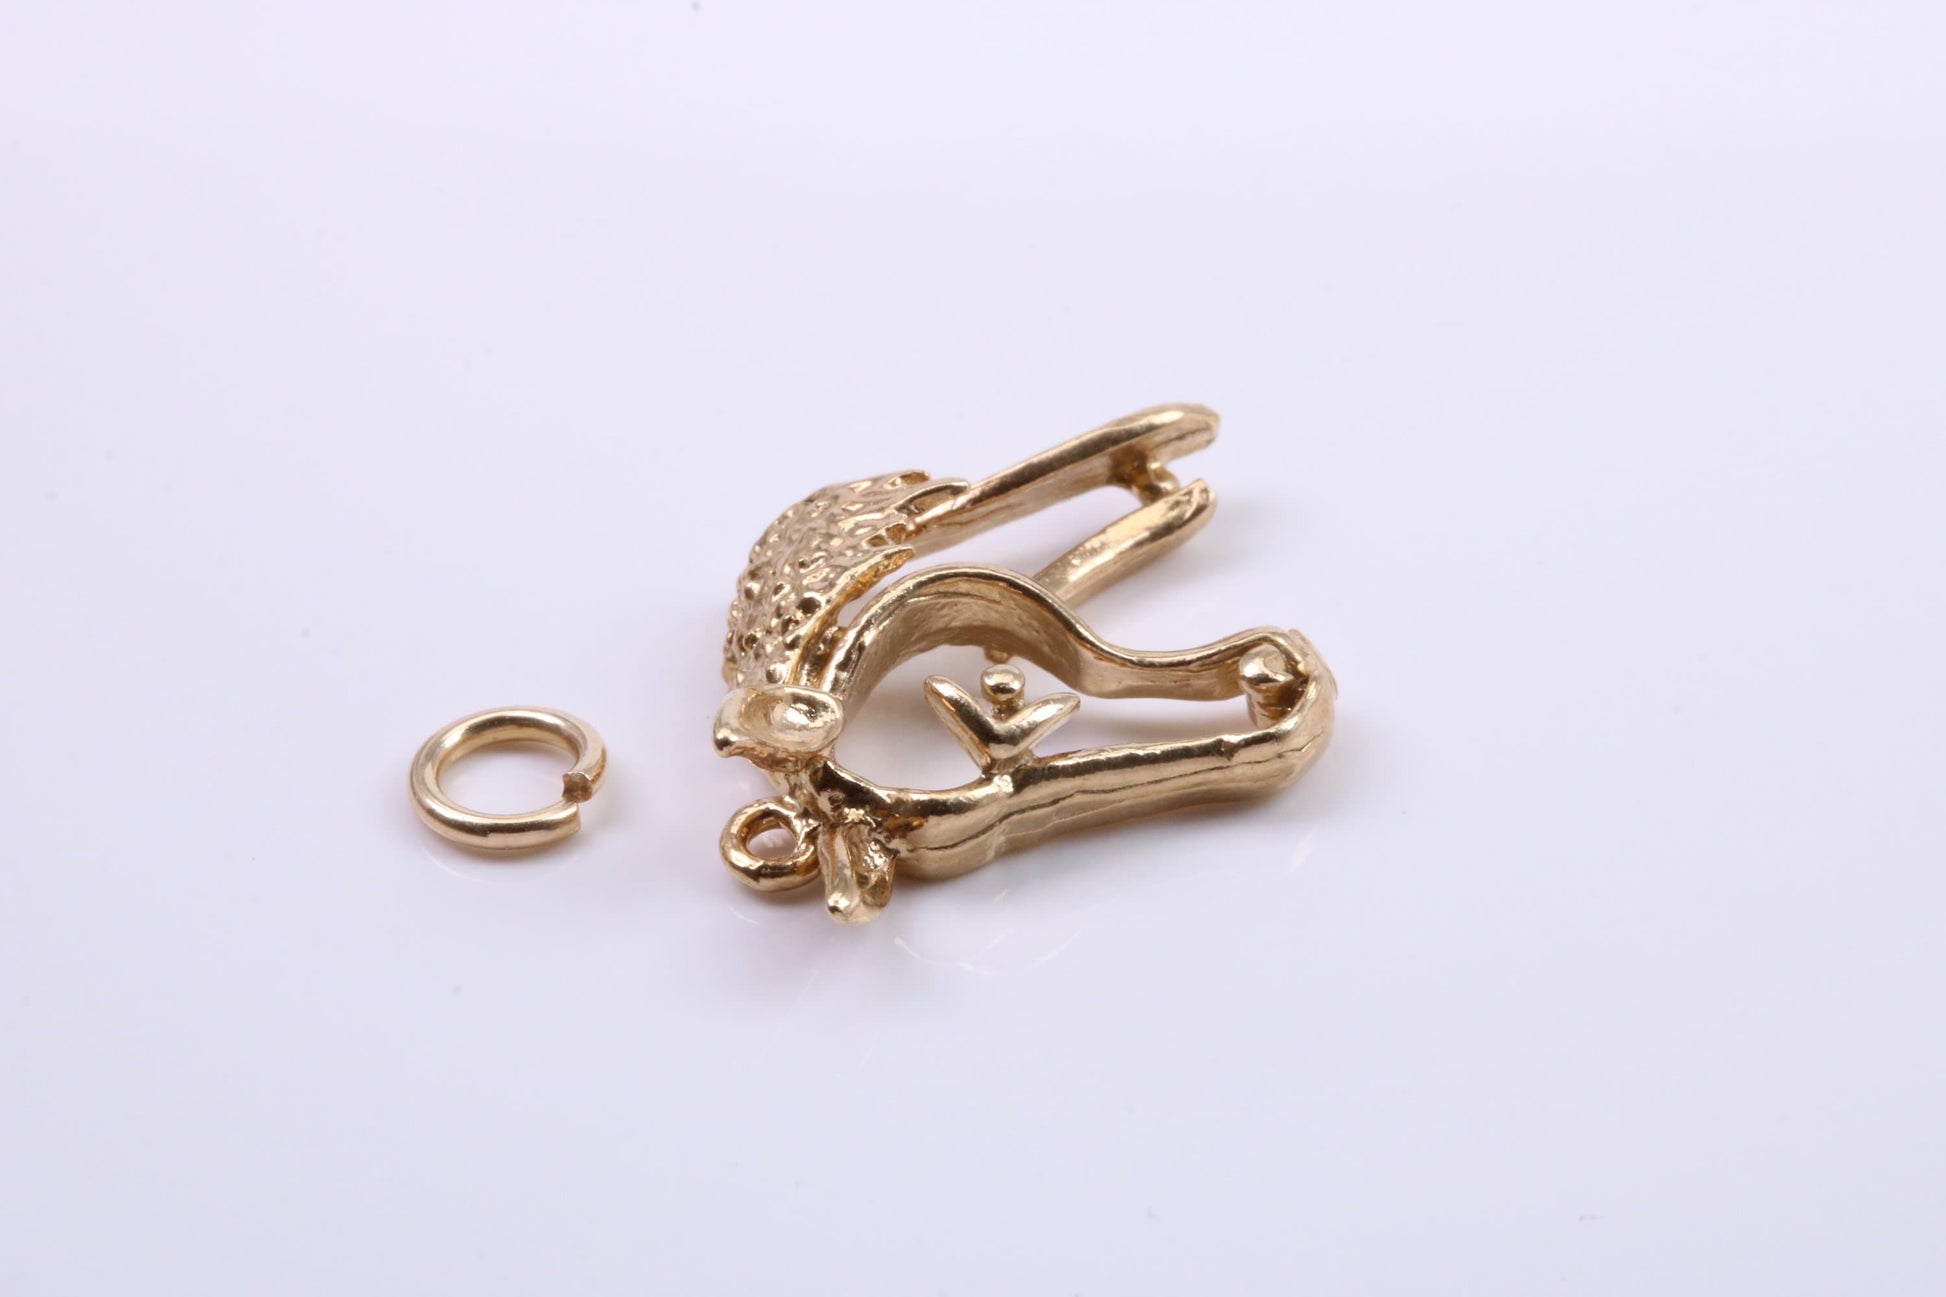 Horse Head Charm, Traditional Charm, Made from Solid 9ct Yellow Gold, British Hallmarked, Complete with Attachment Link